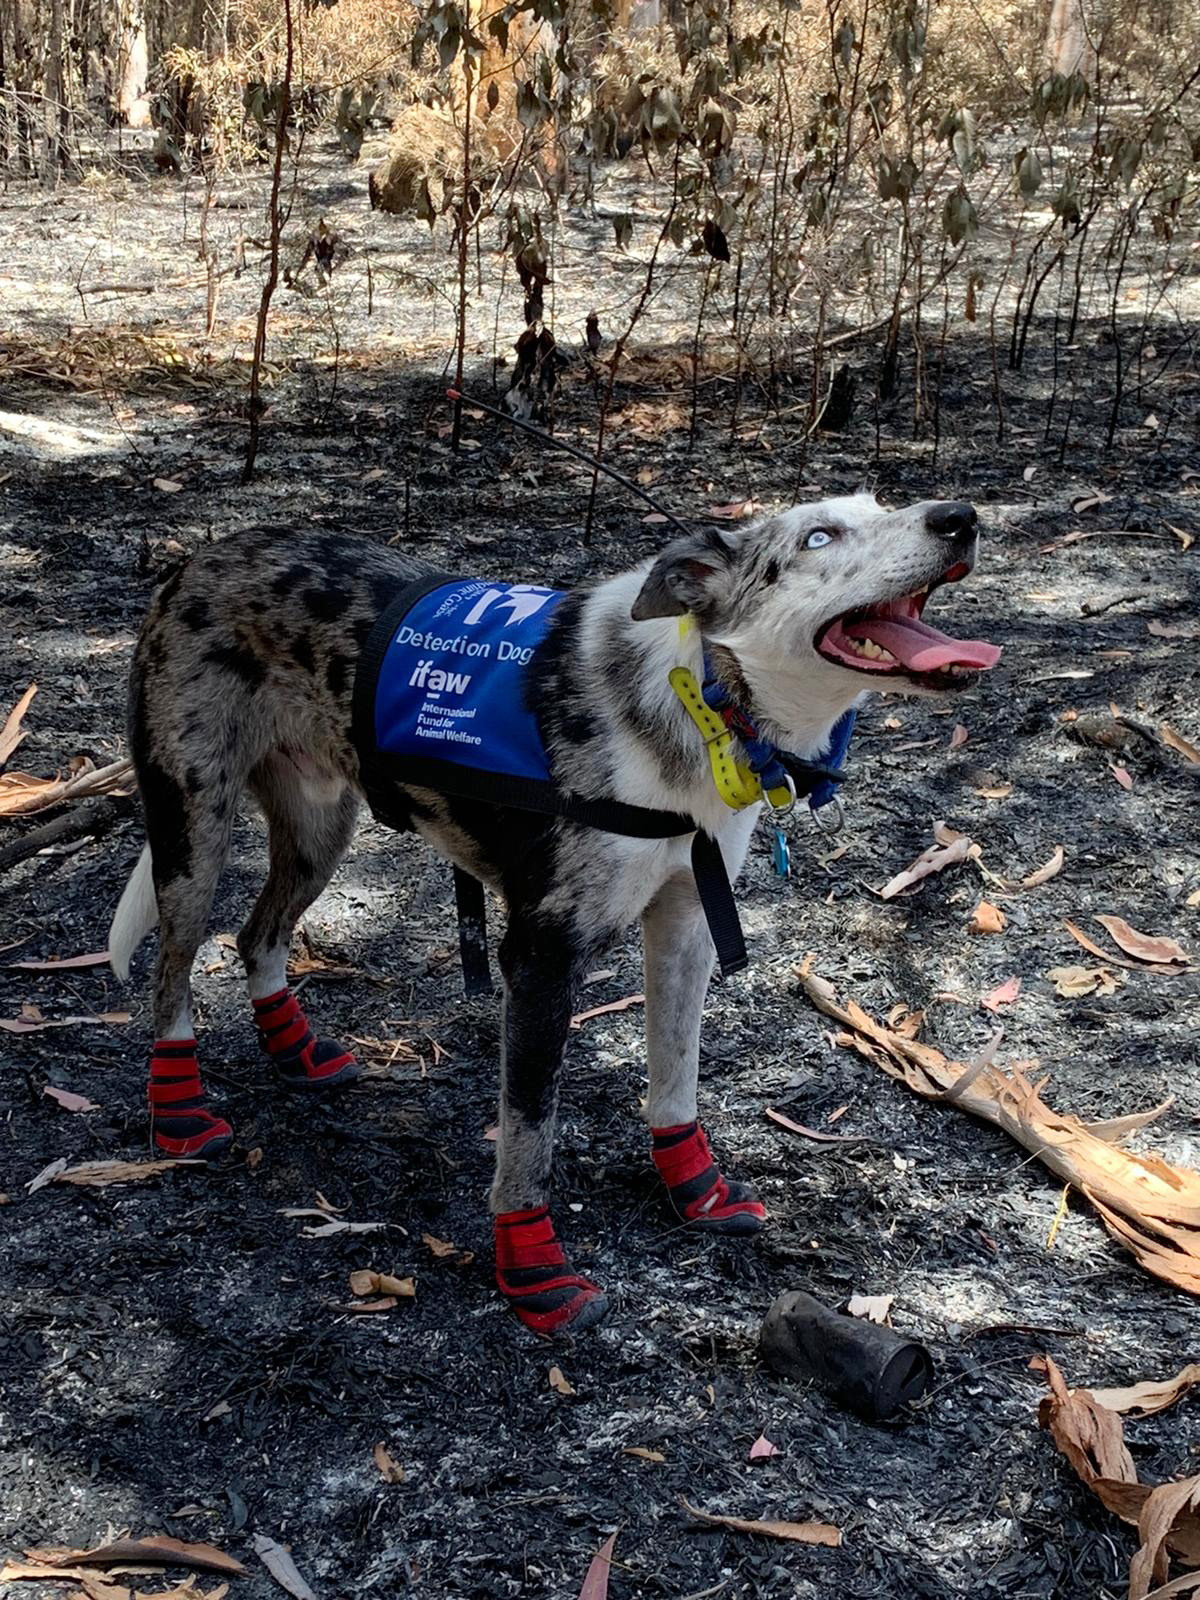 PHOTO: "Bear," a koala detection dog from the International Fund for Animal Welfare, joined the rescue efforts in Bungawalbin National Park, searching an area recently decimated by fires. "Bear" indicated the presence of koalas at several sites. 